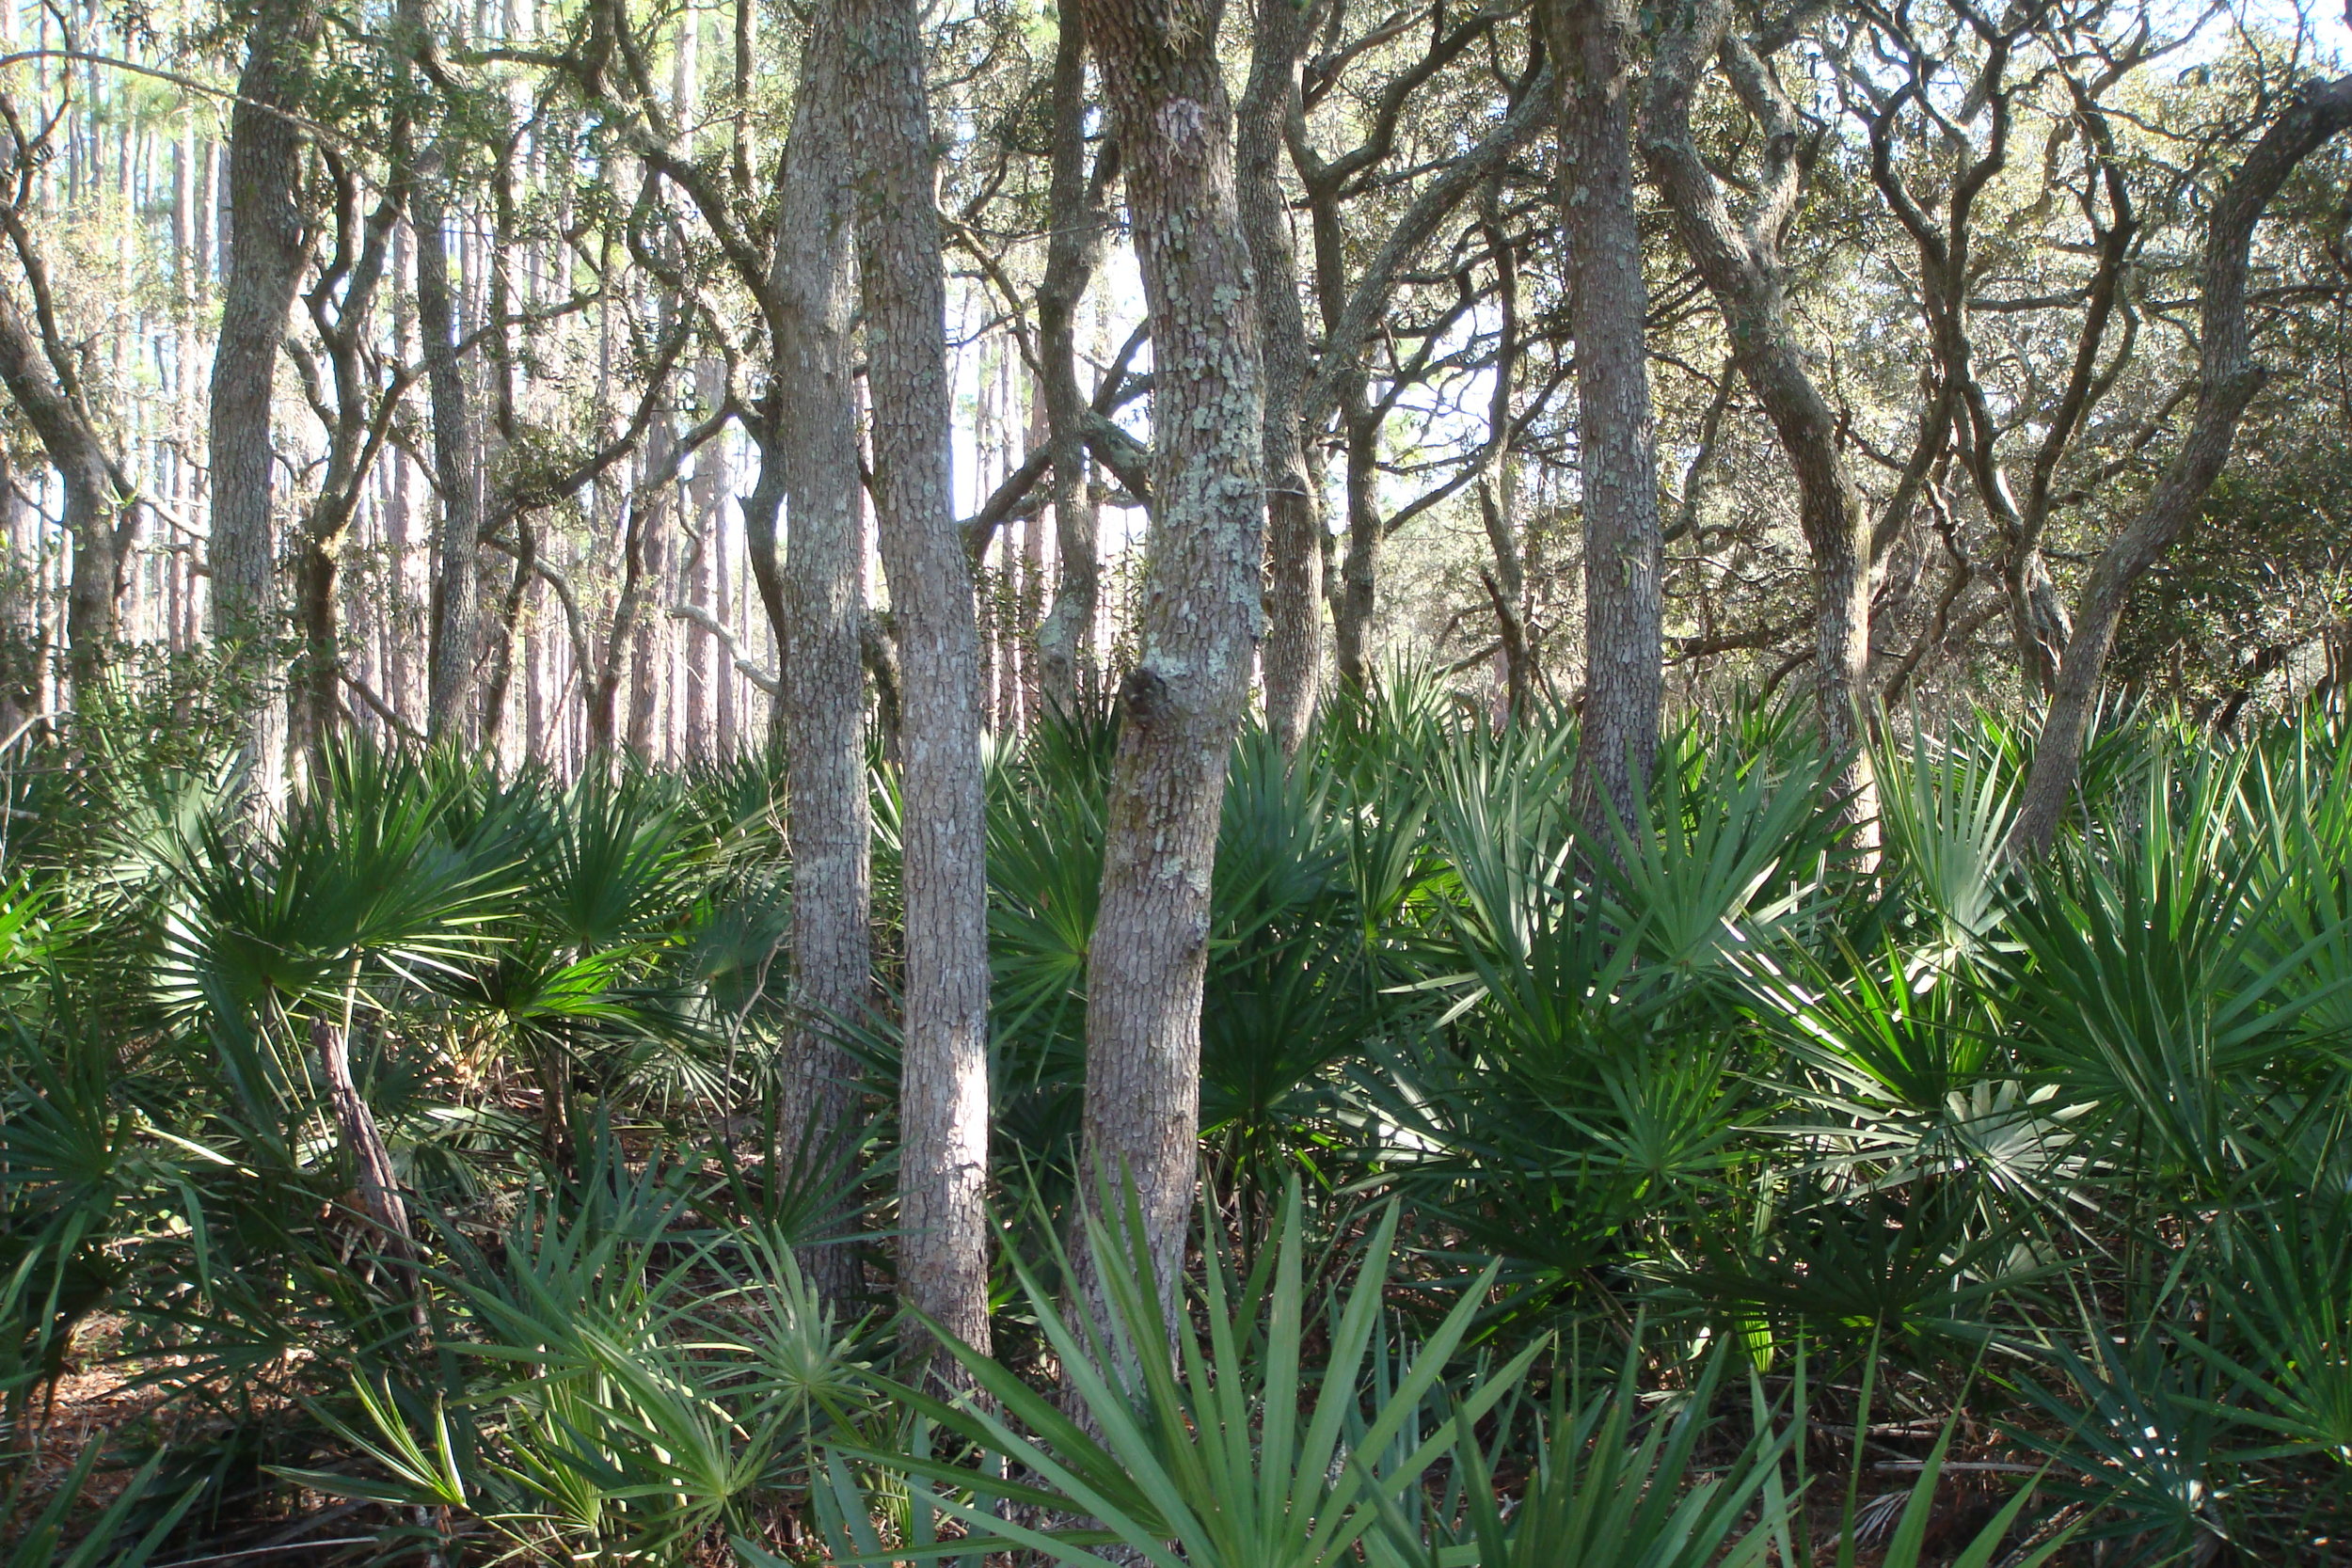 Sections of the Ocala Trail feature oaks with a dramatic understory of saw palmetto.